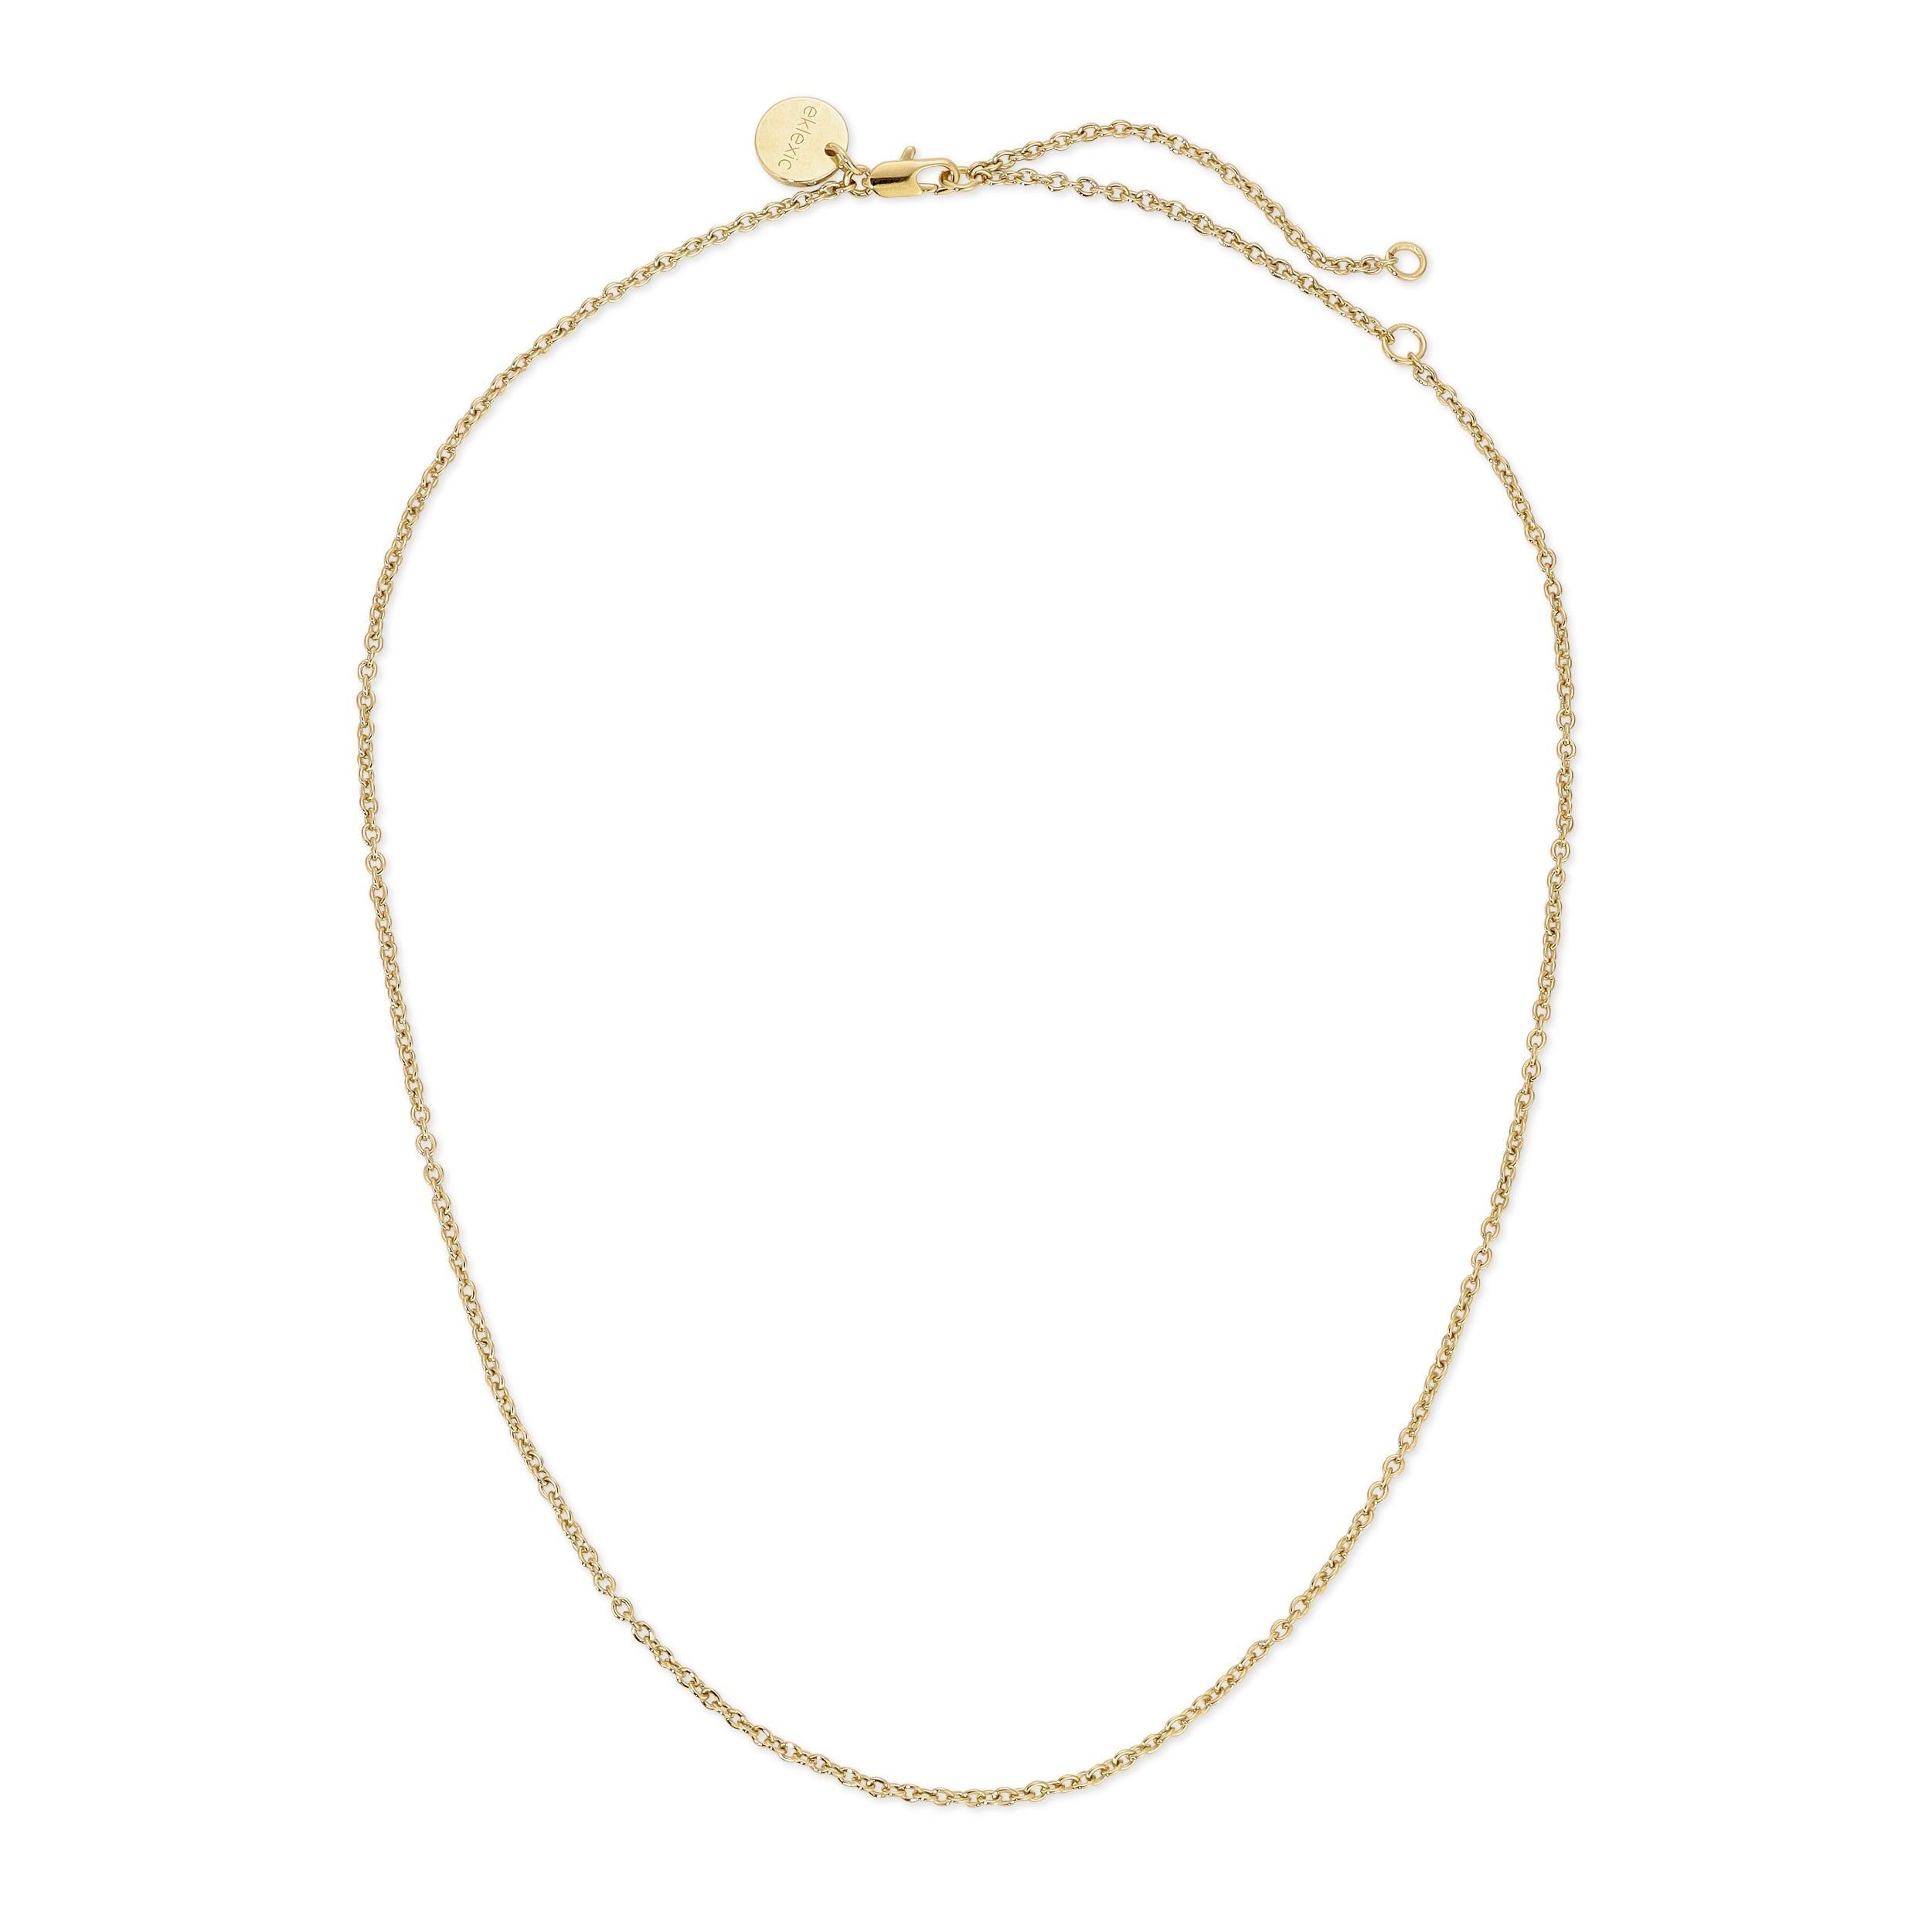 a gold chain necklace on a white background